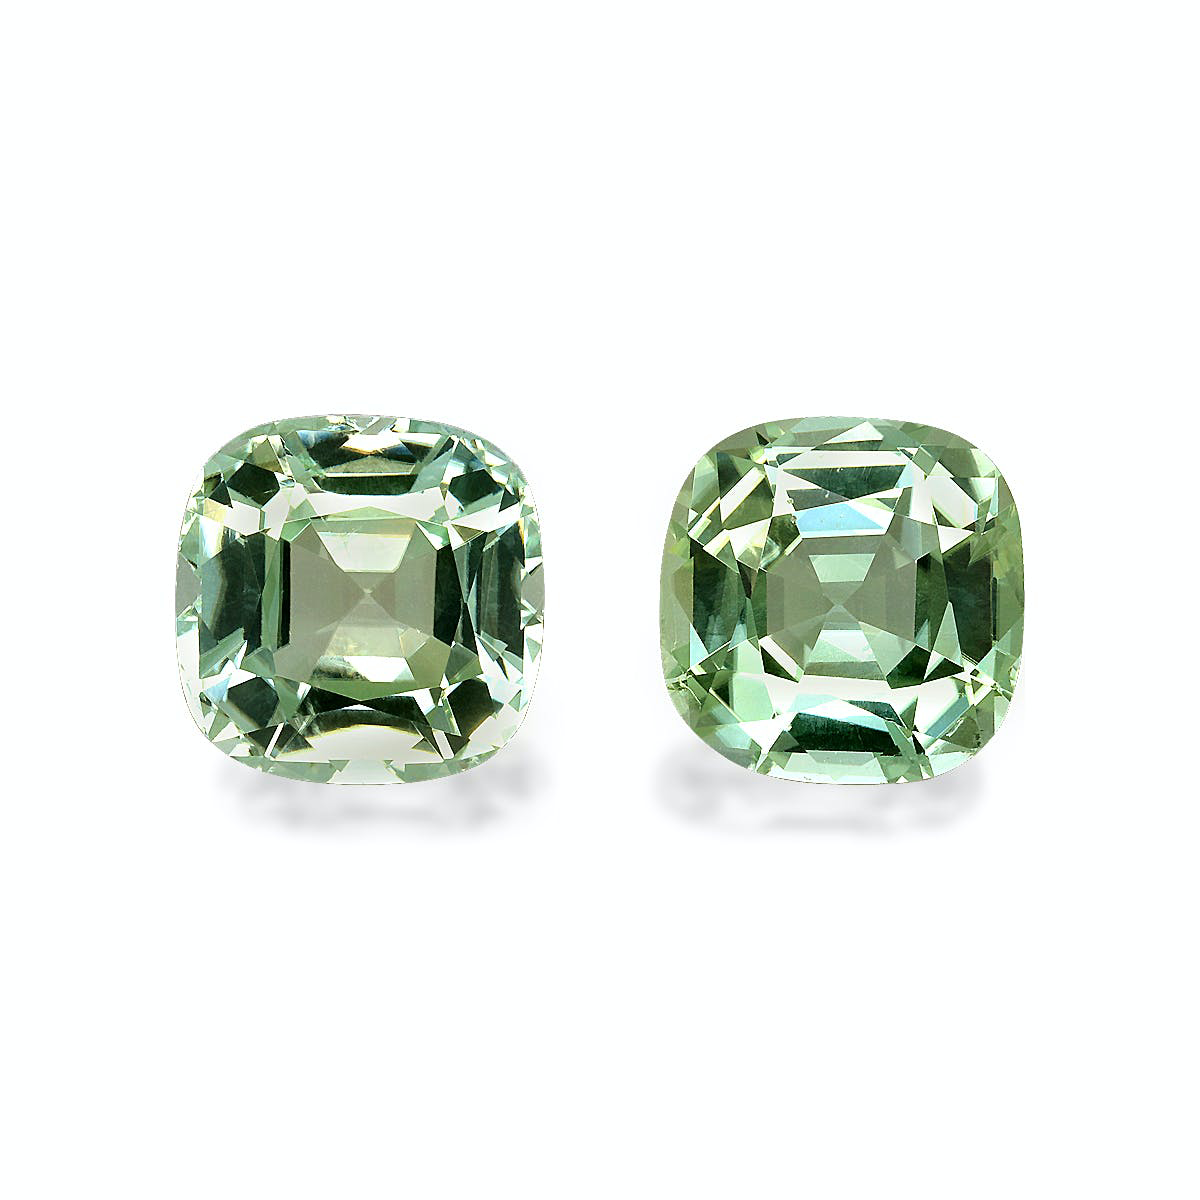 Picture of Pale Green Tourmaline 12.83ct - 11mm Pair (TG1359)